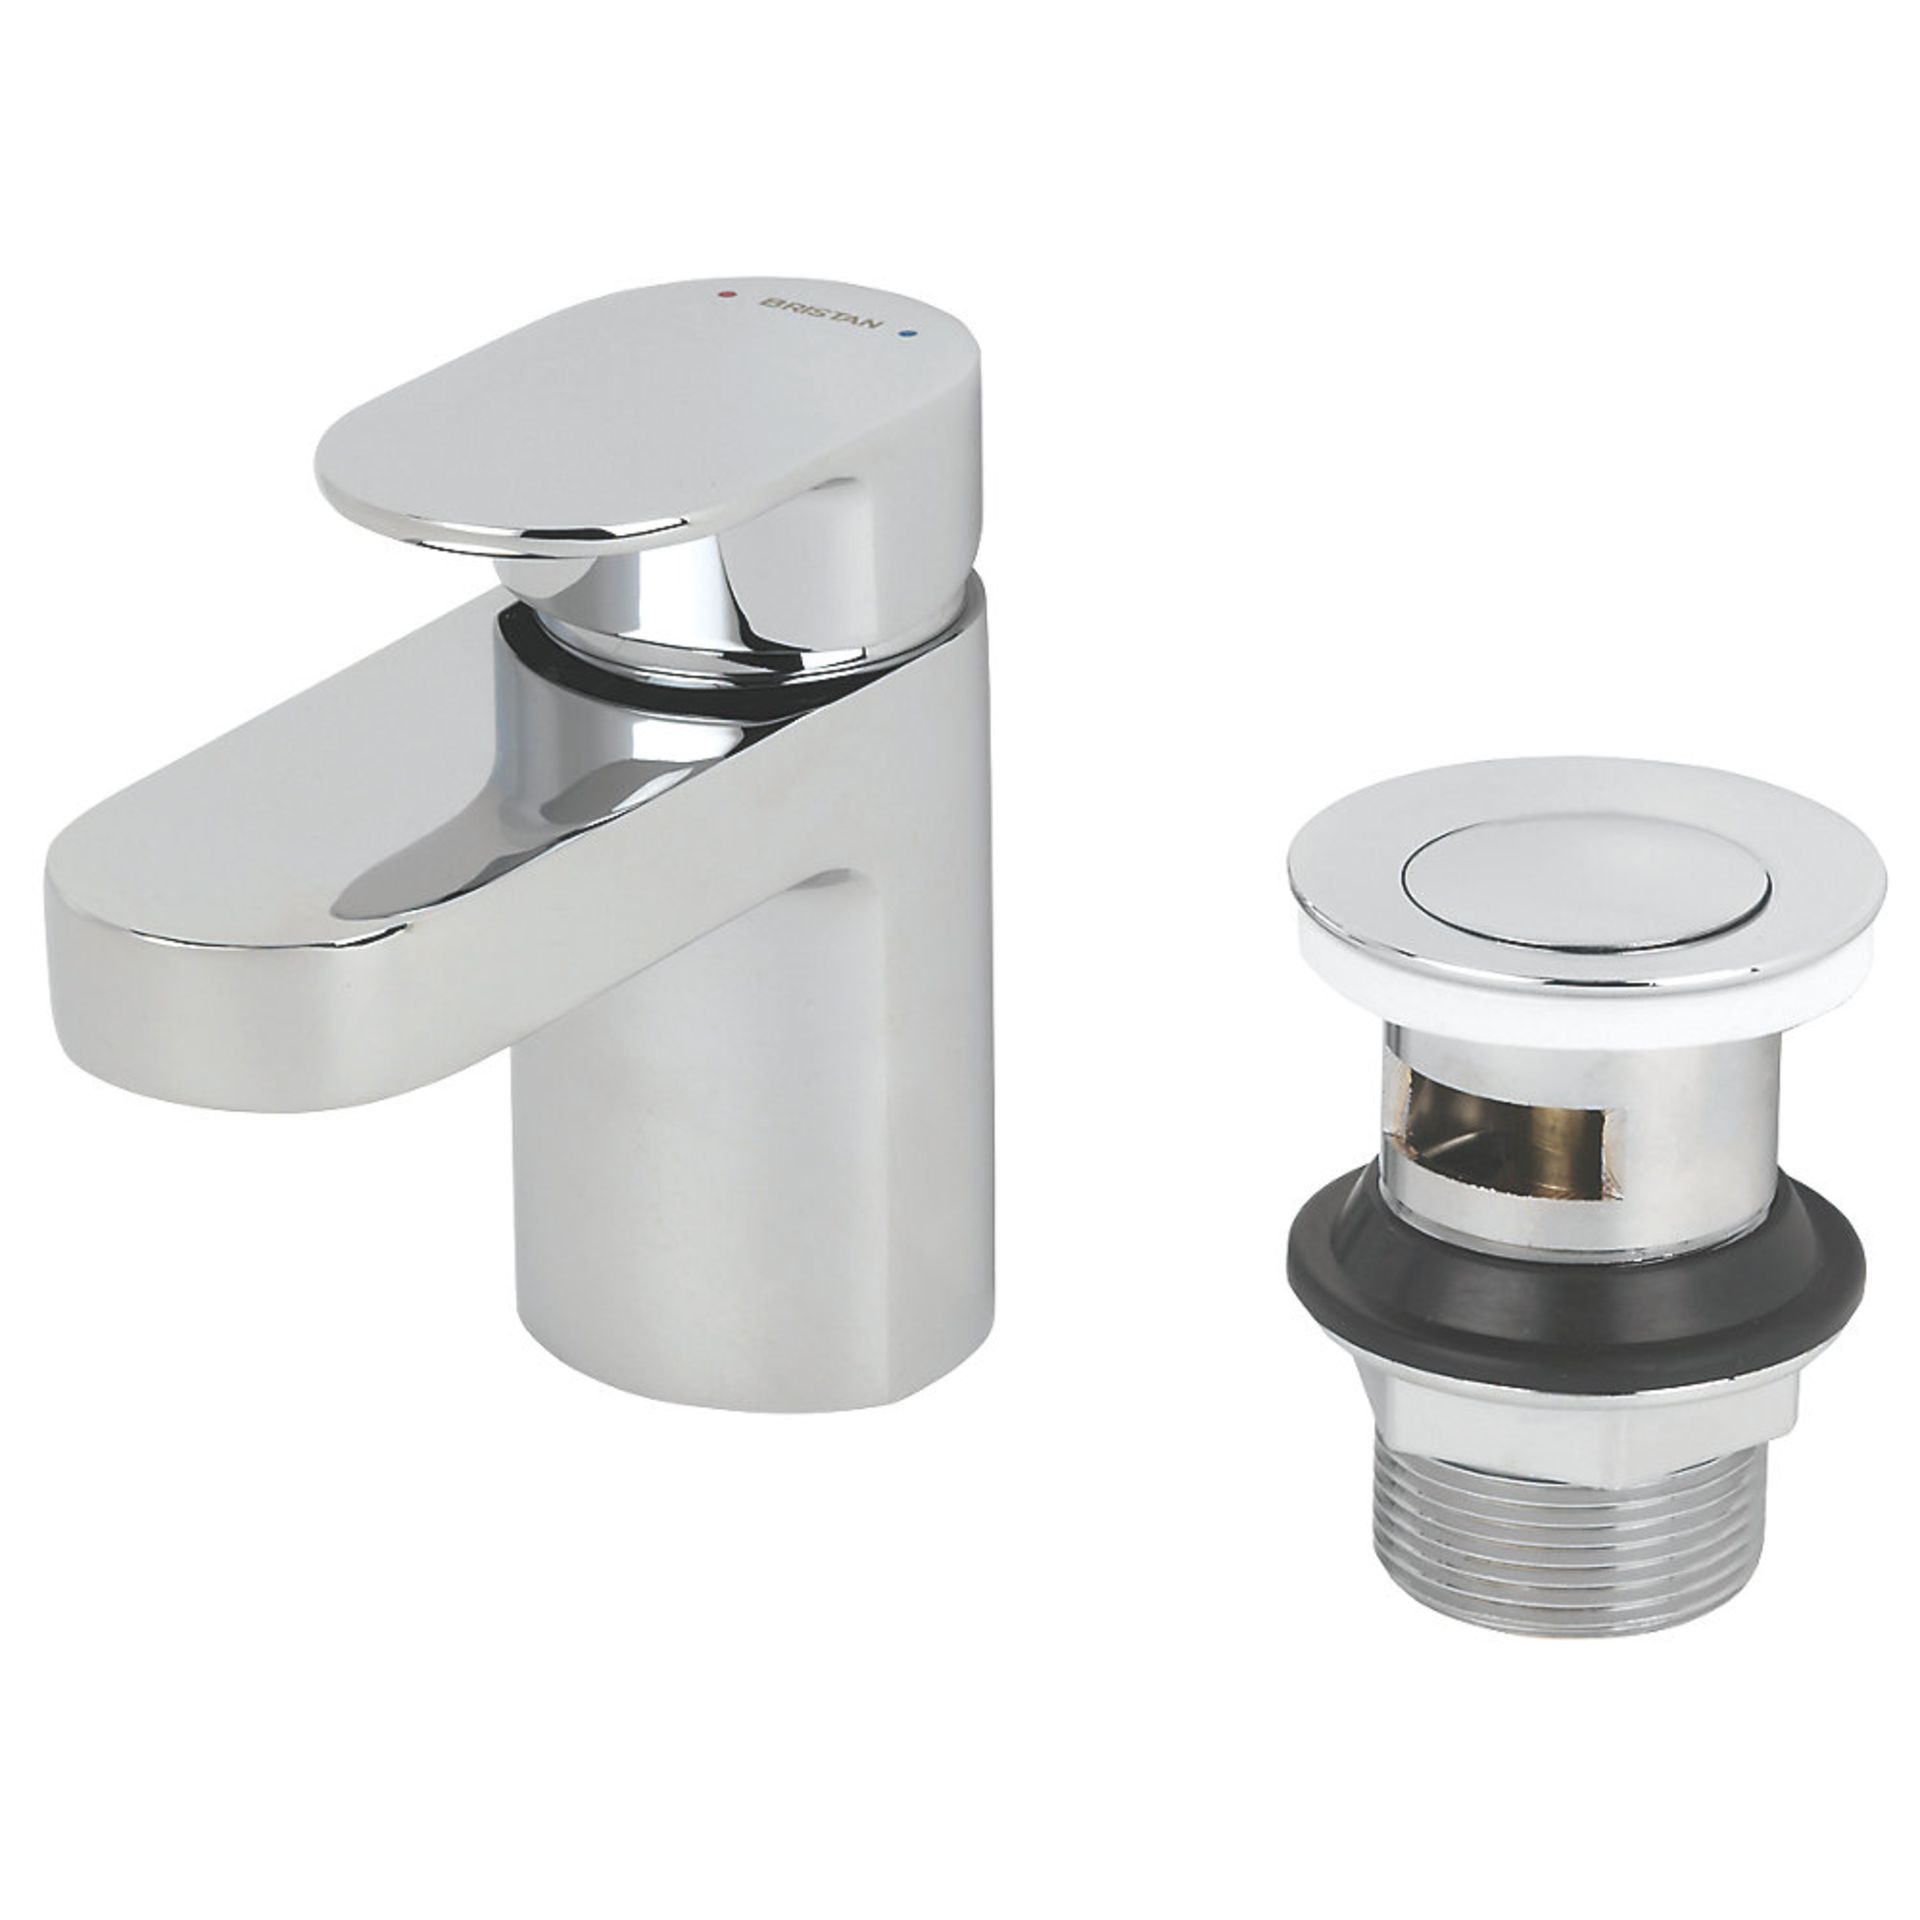 (PP97) Bristan Frenzy Basin Mono Mixer Tap. Chrome-plated brass. Ceramic disc technology ensures - Image 2 of 5